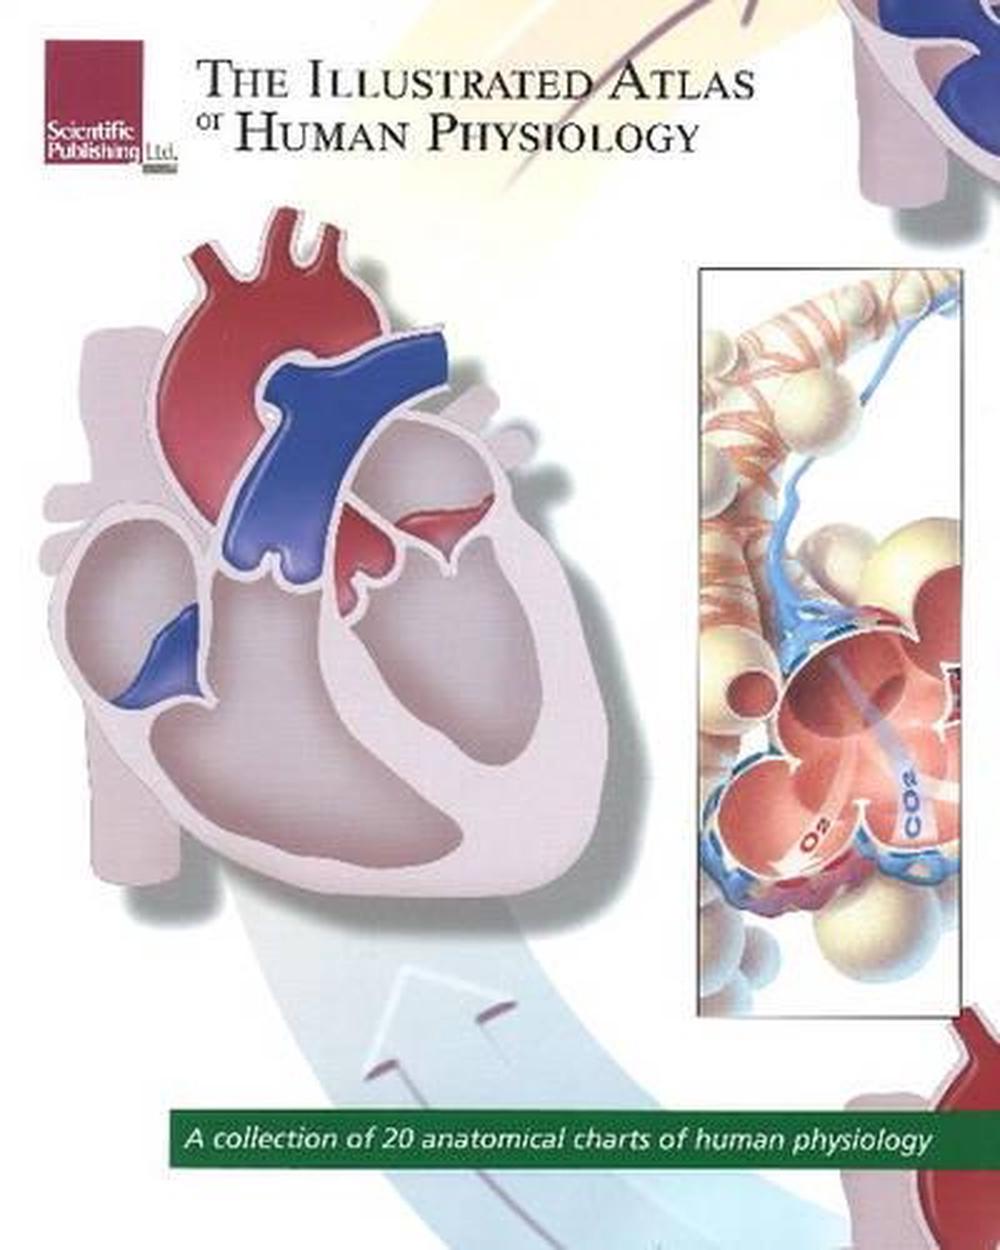 Human　Collection　Charts　by　Scientific　9781932922981　of　of　Atlas　The　Publishing,　at　online　Anatomical　Illustrated　20　Paperback,　Buy　Physiology　The　Nile　A　of　Physiology:　Human